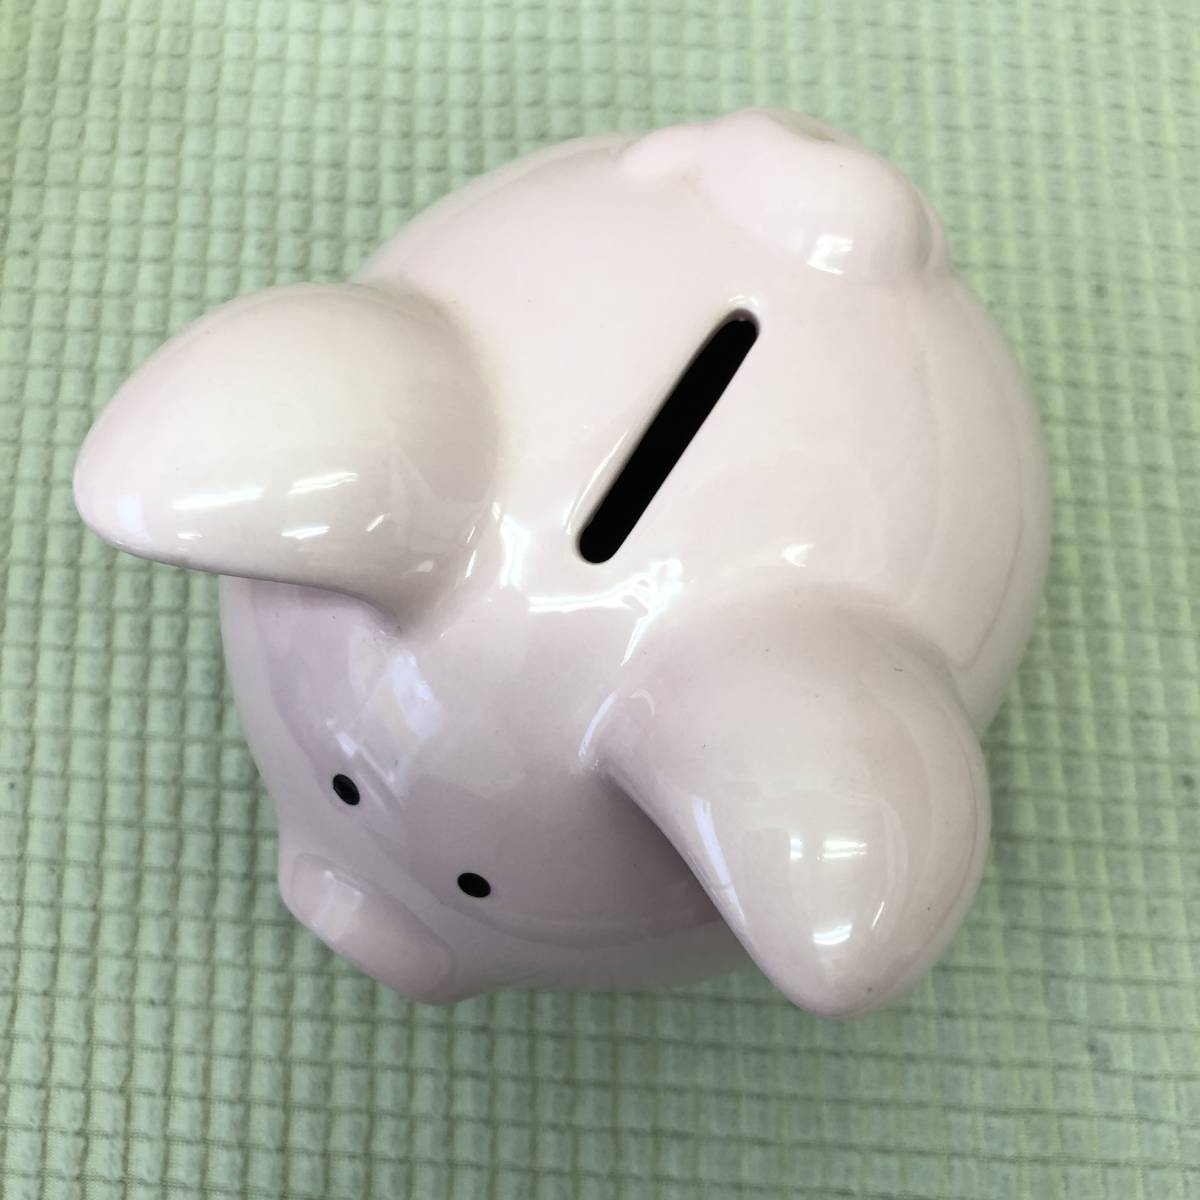  ceramics and porcelain made [ pink. pig. savings box ] height : approximately 10.5cm total length : approximately 11.5cm pig .. miscellaneous goods interior 